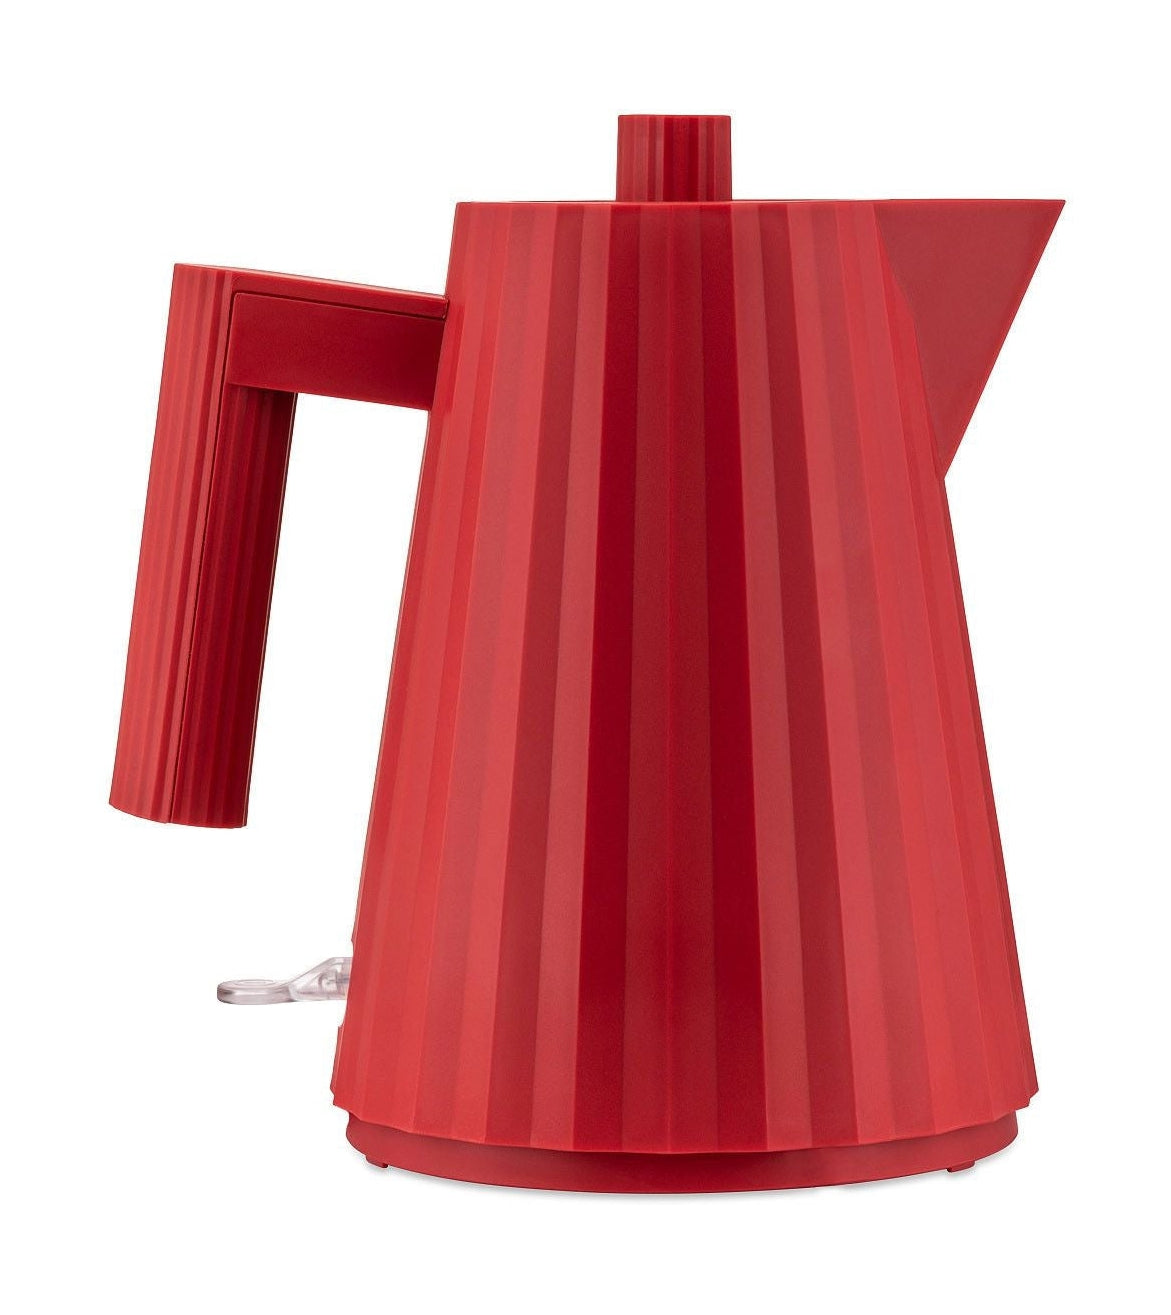 Alessi Plissé Water Kettle 1 Liter, Red